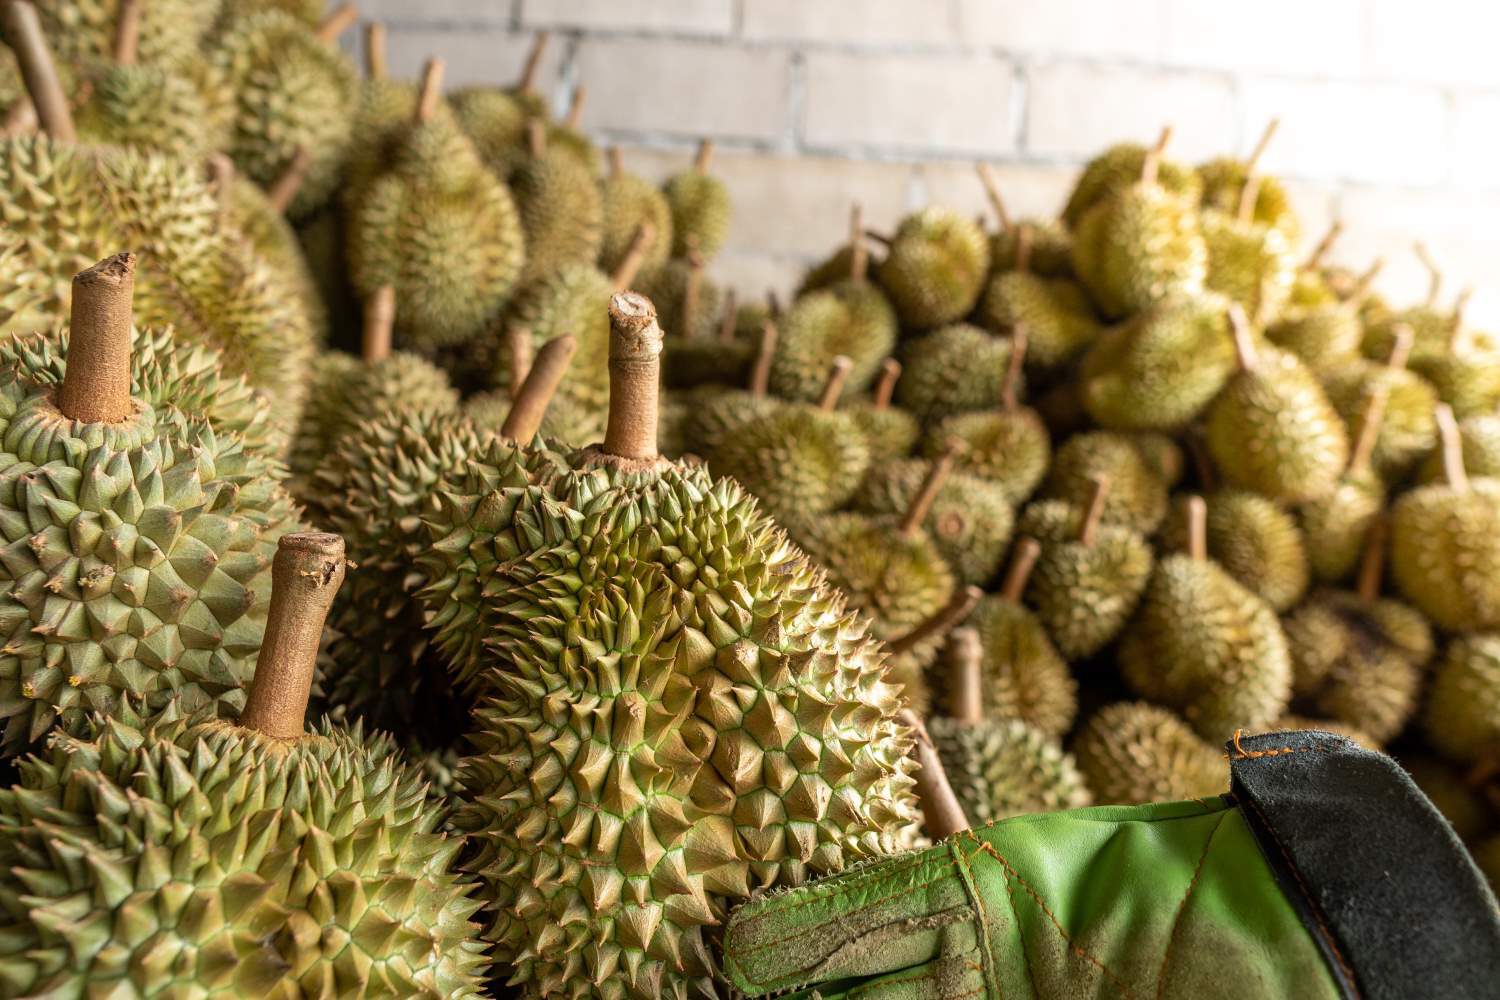 seasonal-durian-is-being-sold-to-traders-for-export-to-china-2